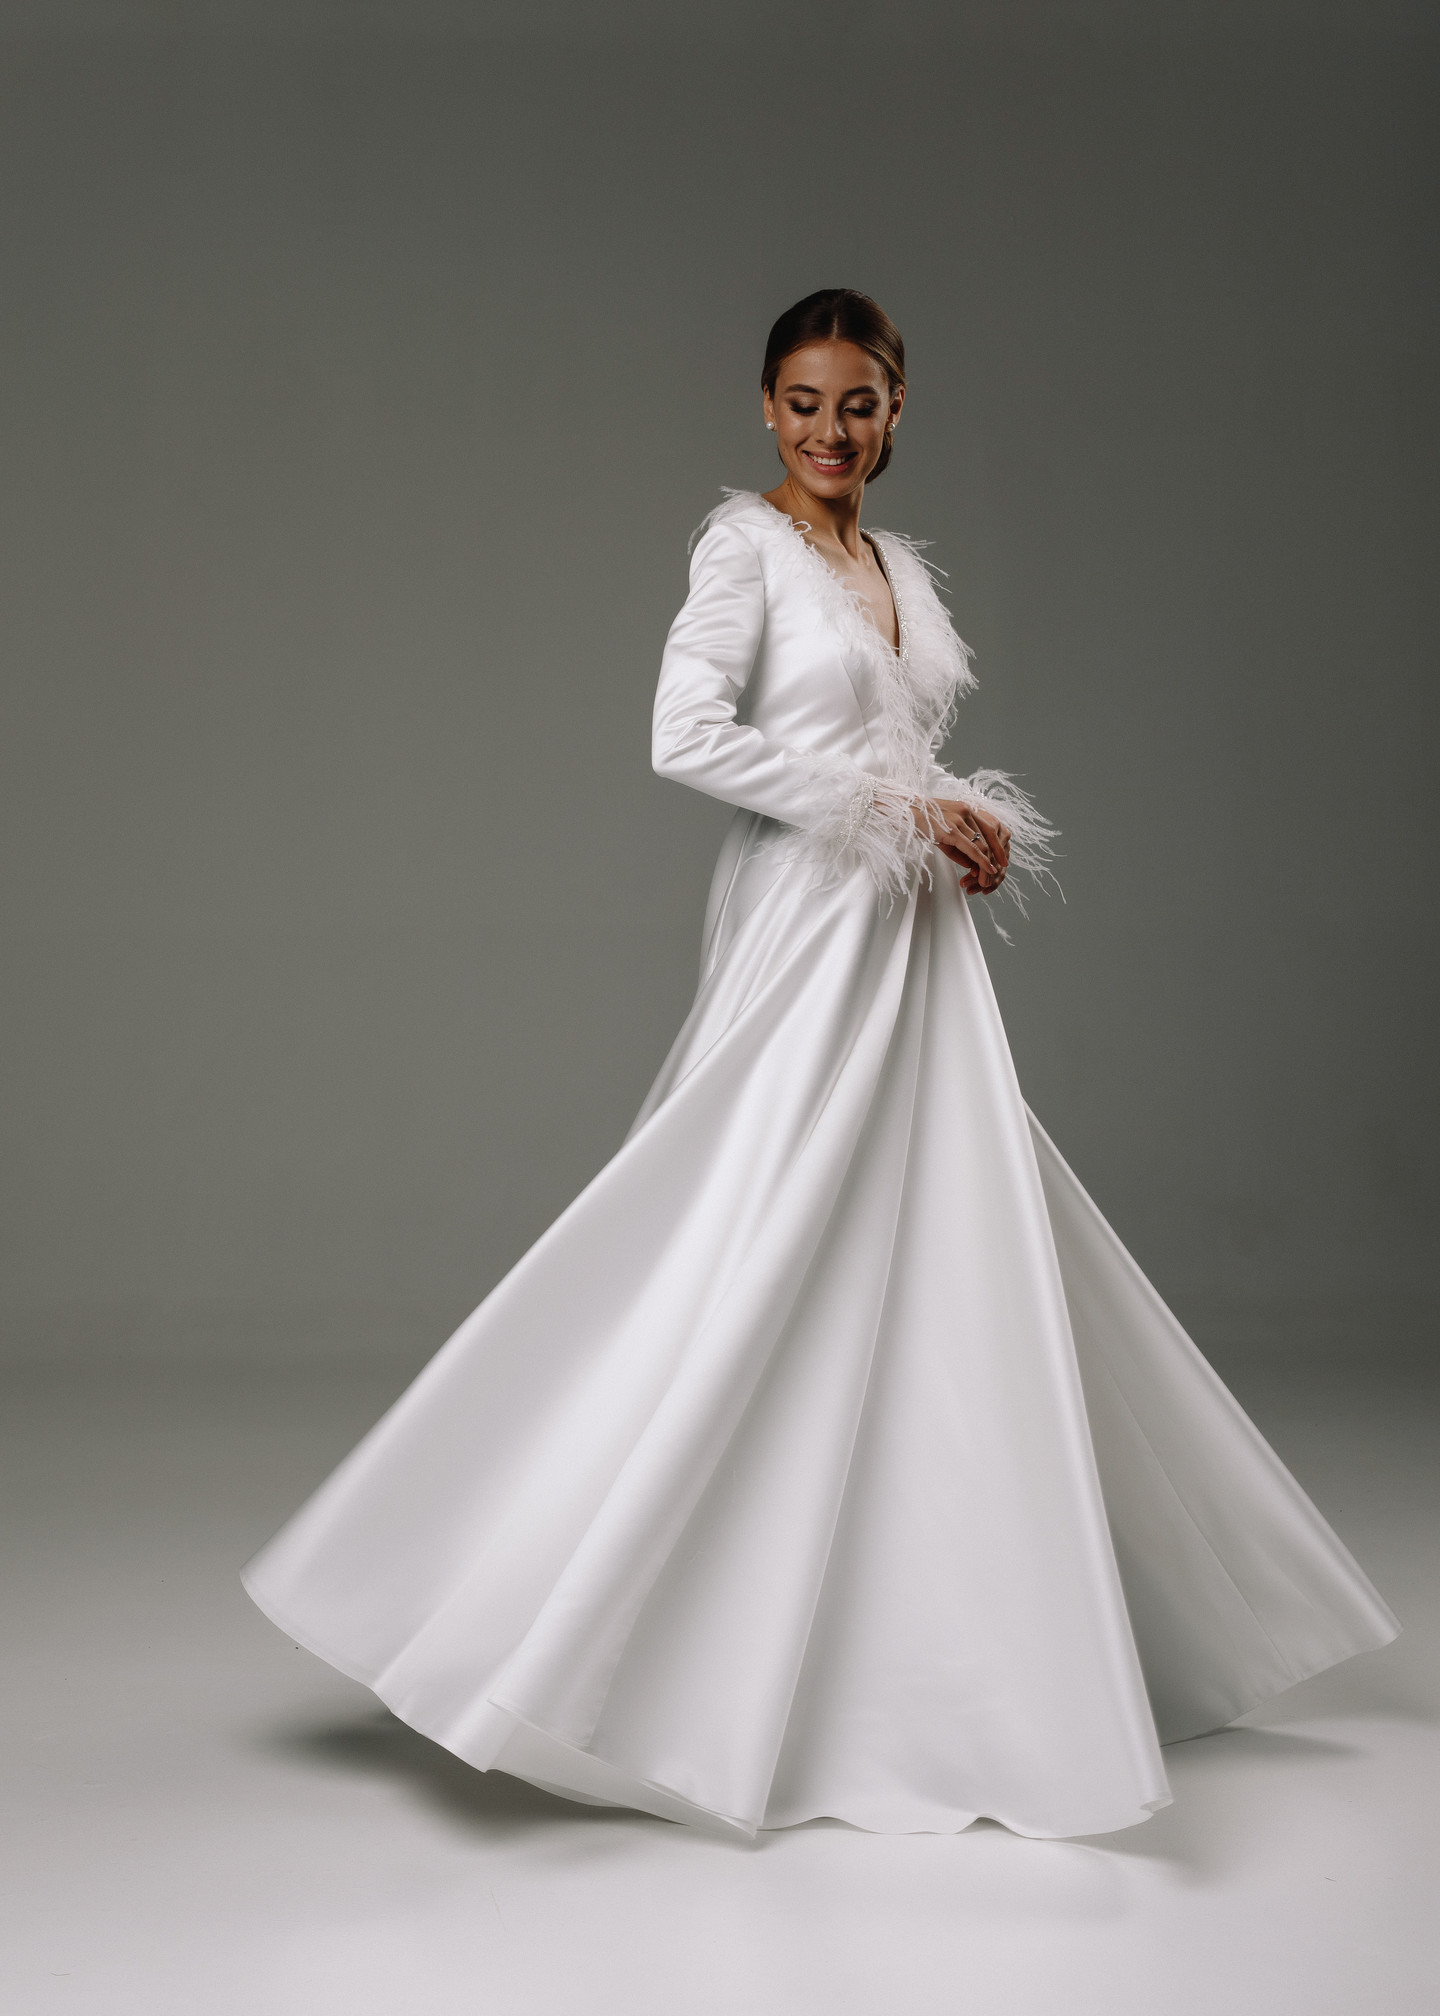 Anisya gown, 2020, couture, dress, bridal, off-white, satin, embroidery, A-line, sleeves, archive